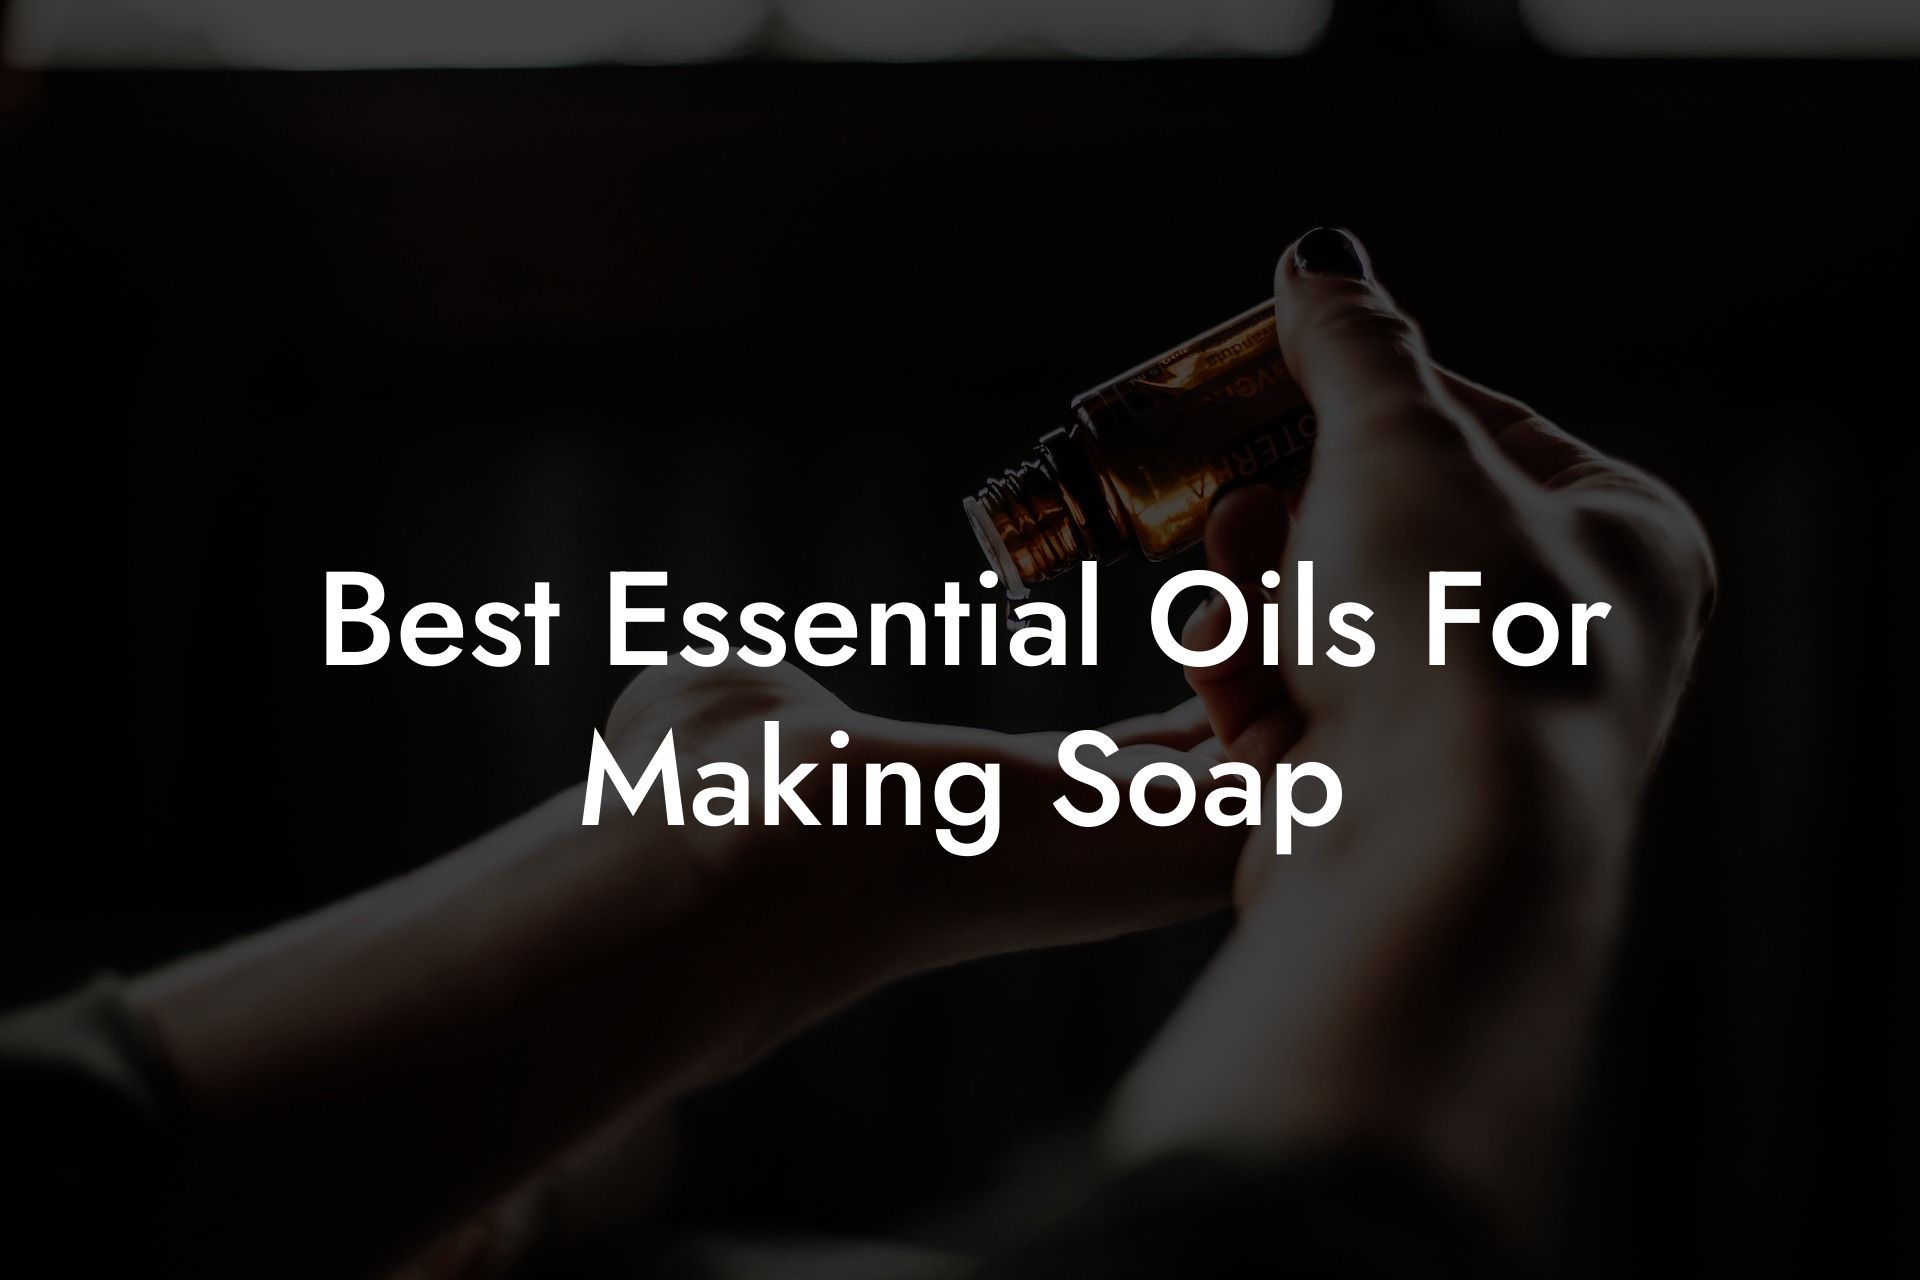 Best Essential Oils For Making Soap